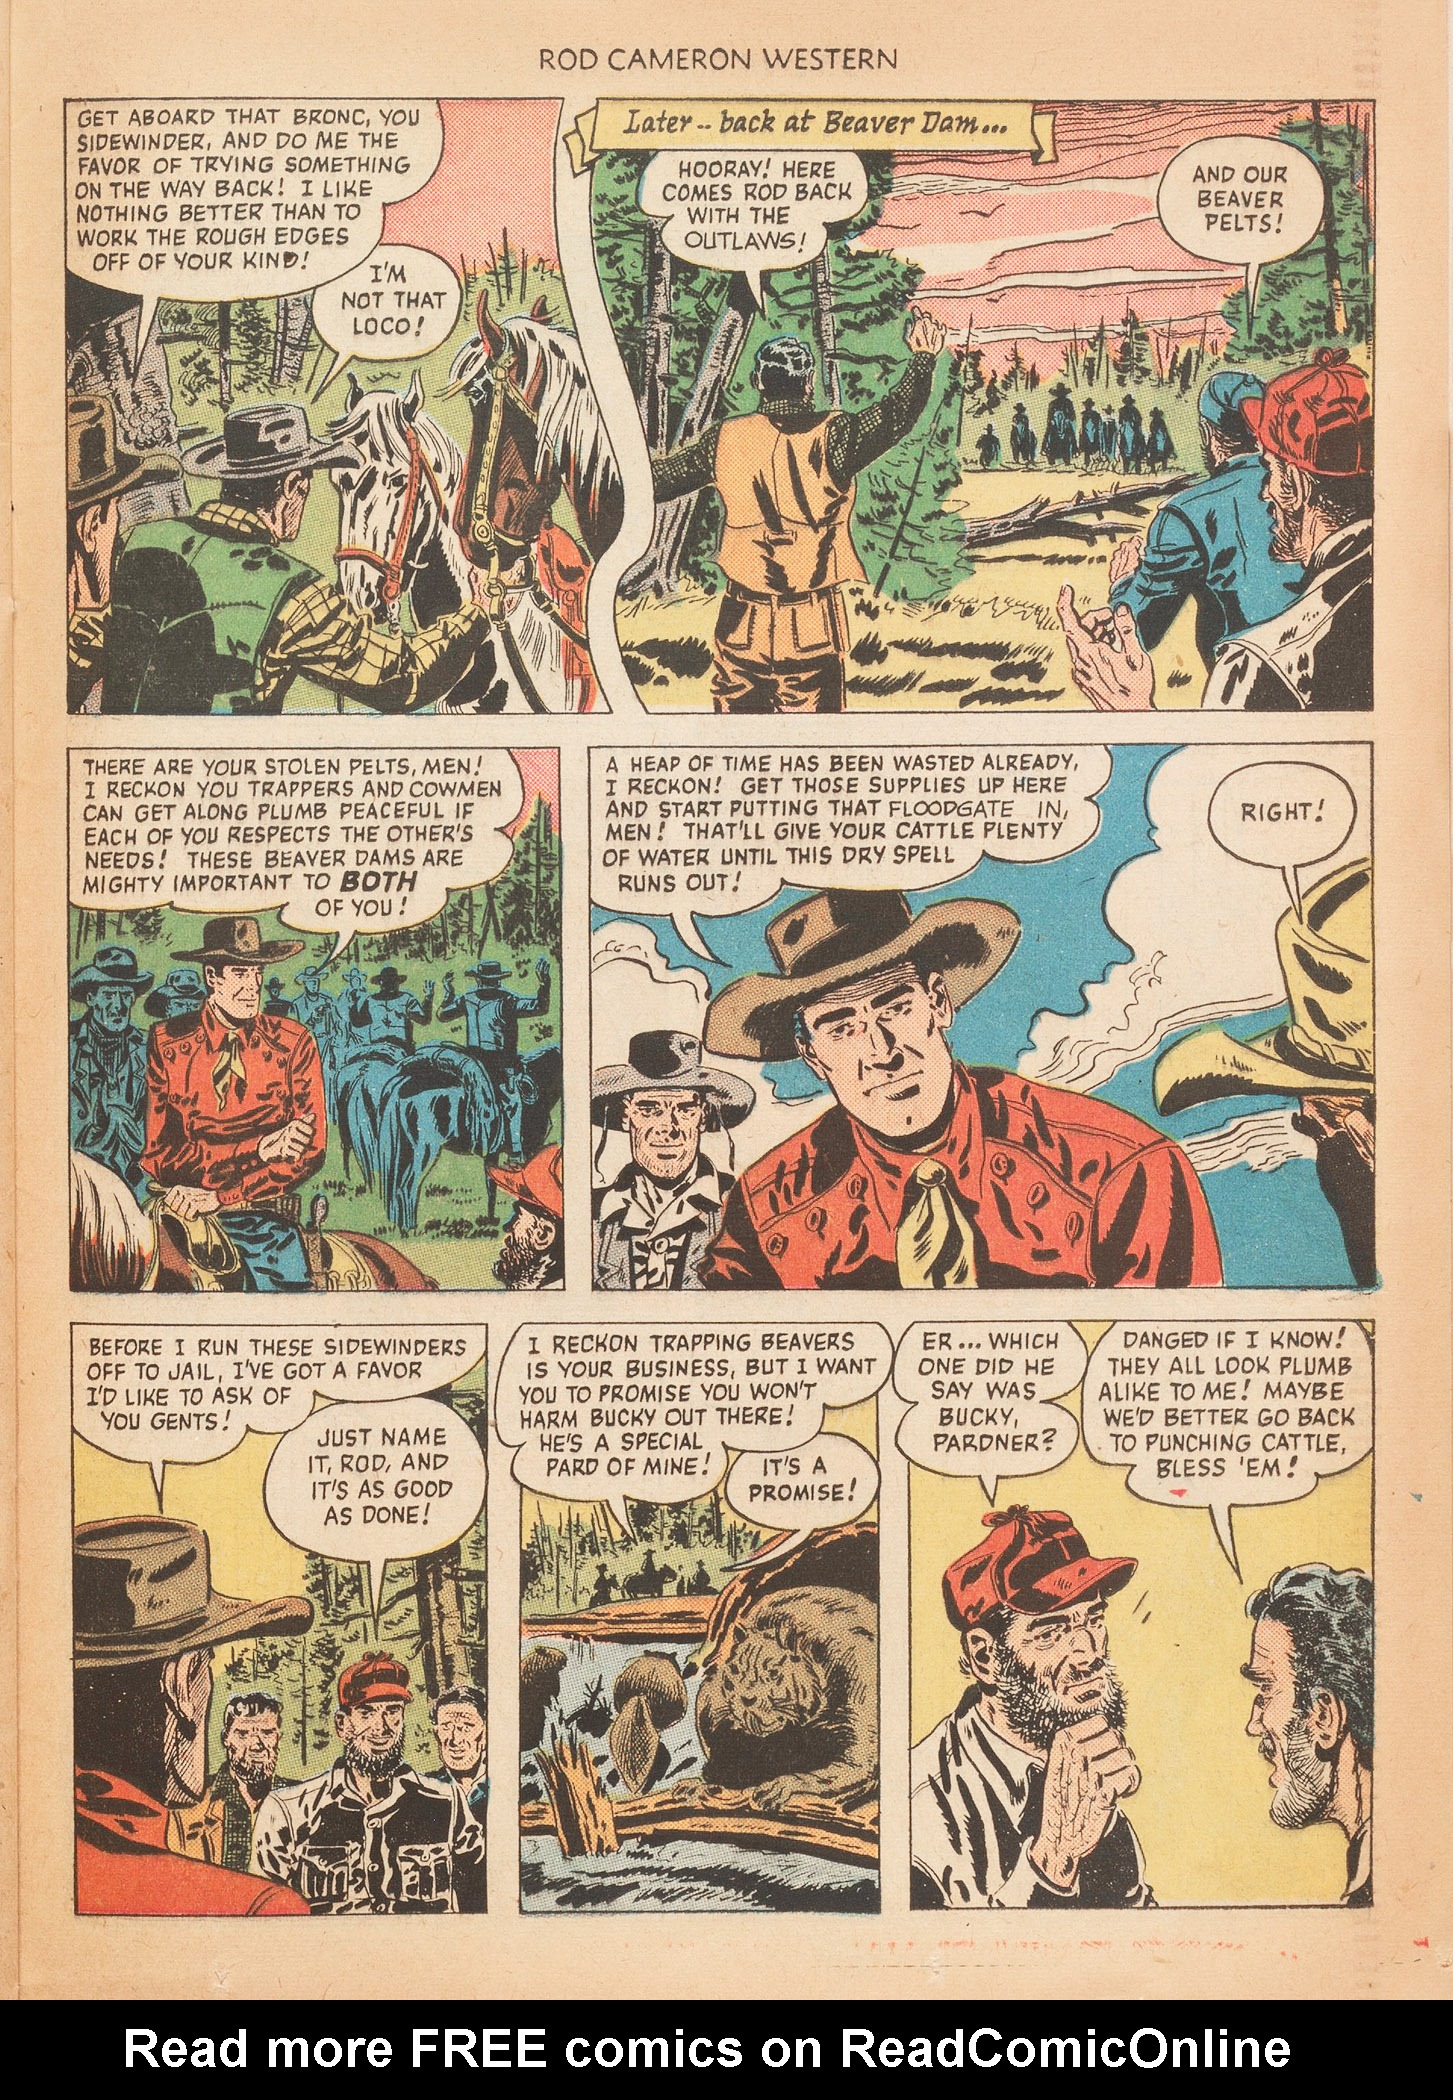 Read online Rod Cameron Western comic -  Issue #4 - 25